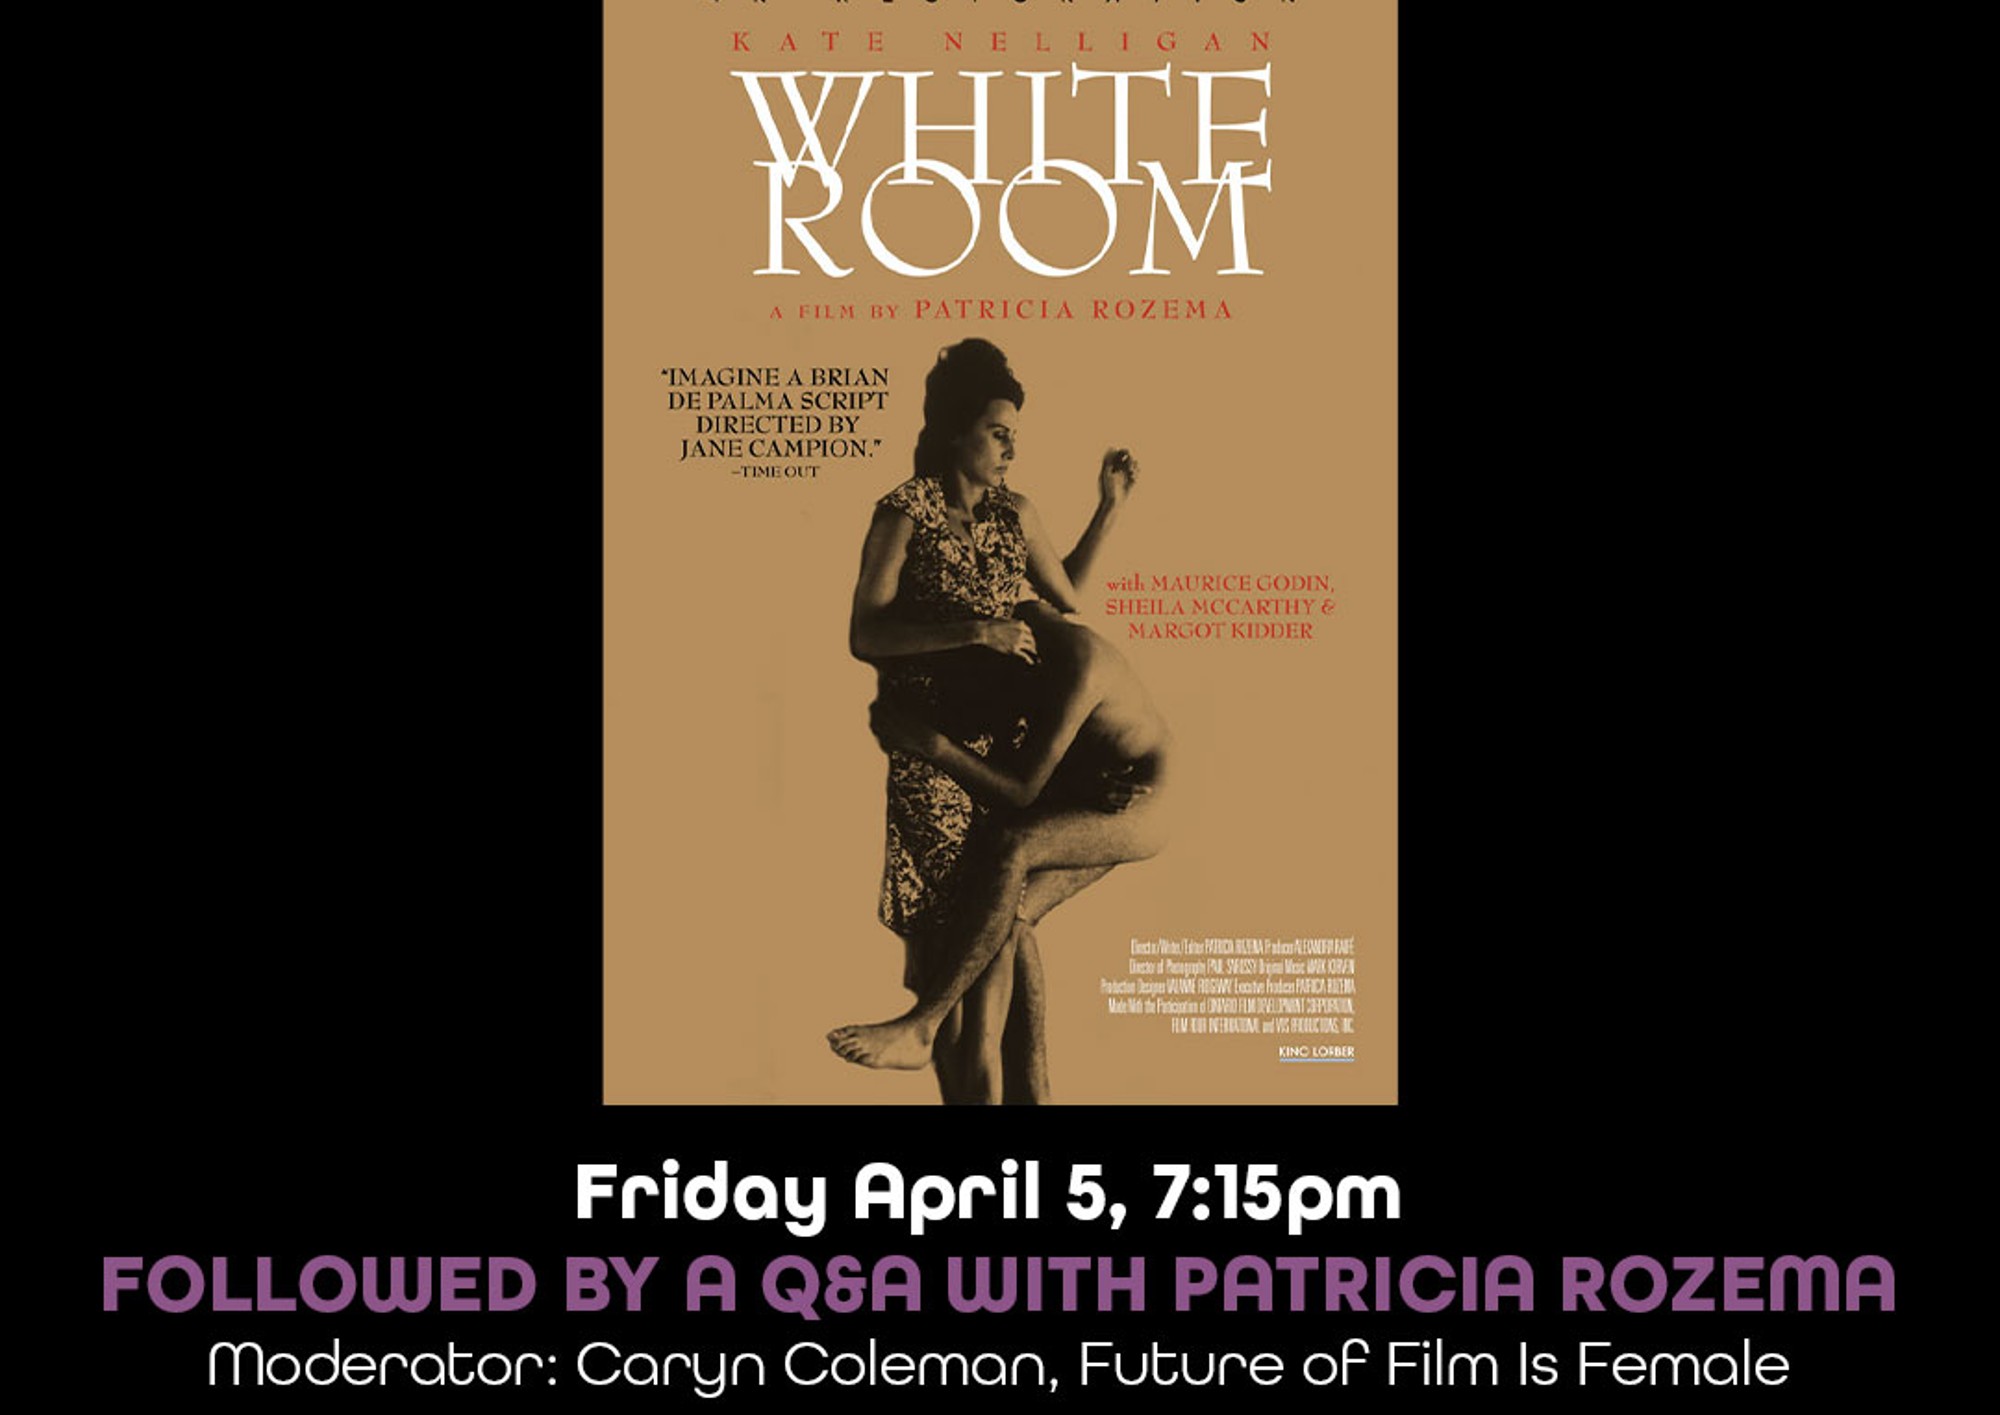 Poster for Q&A with Patricia Rozema for her film White Room